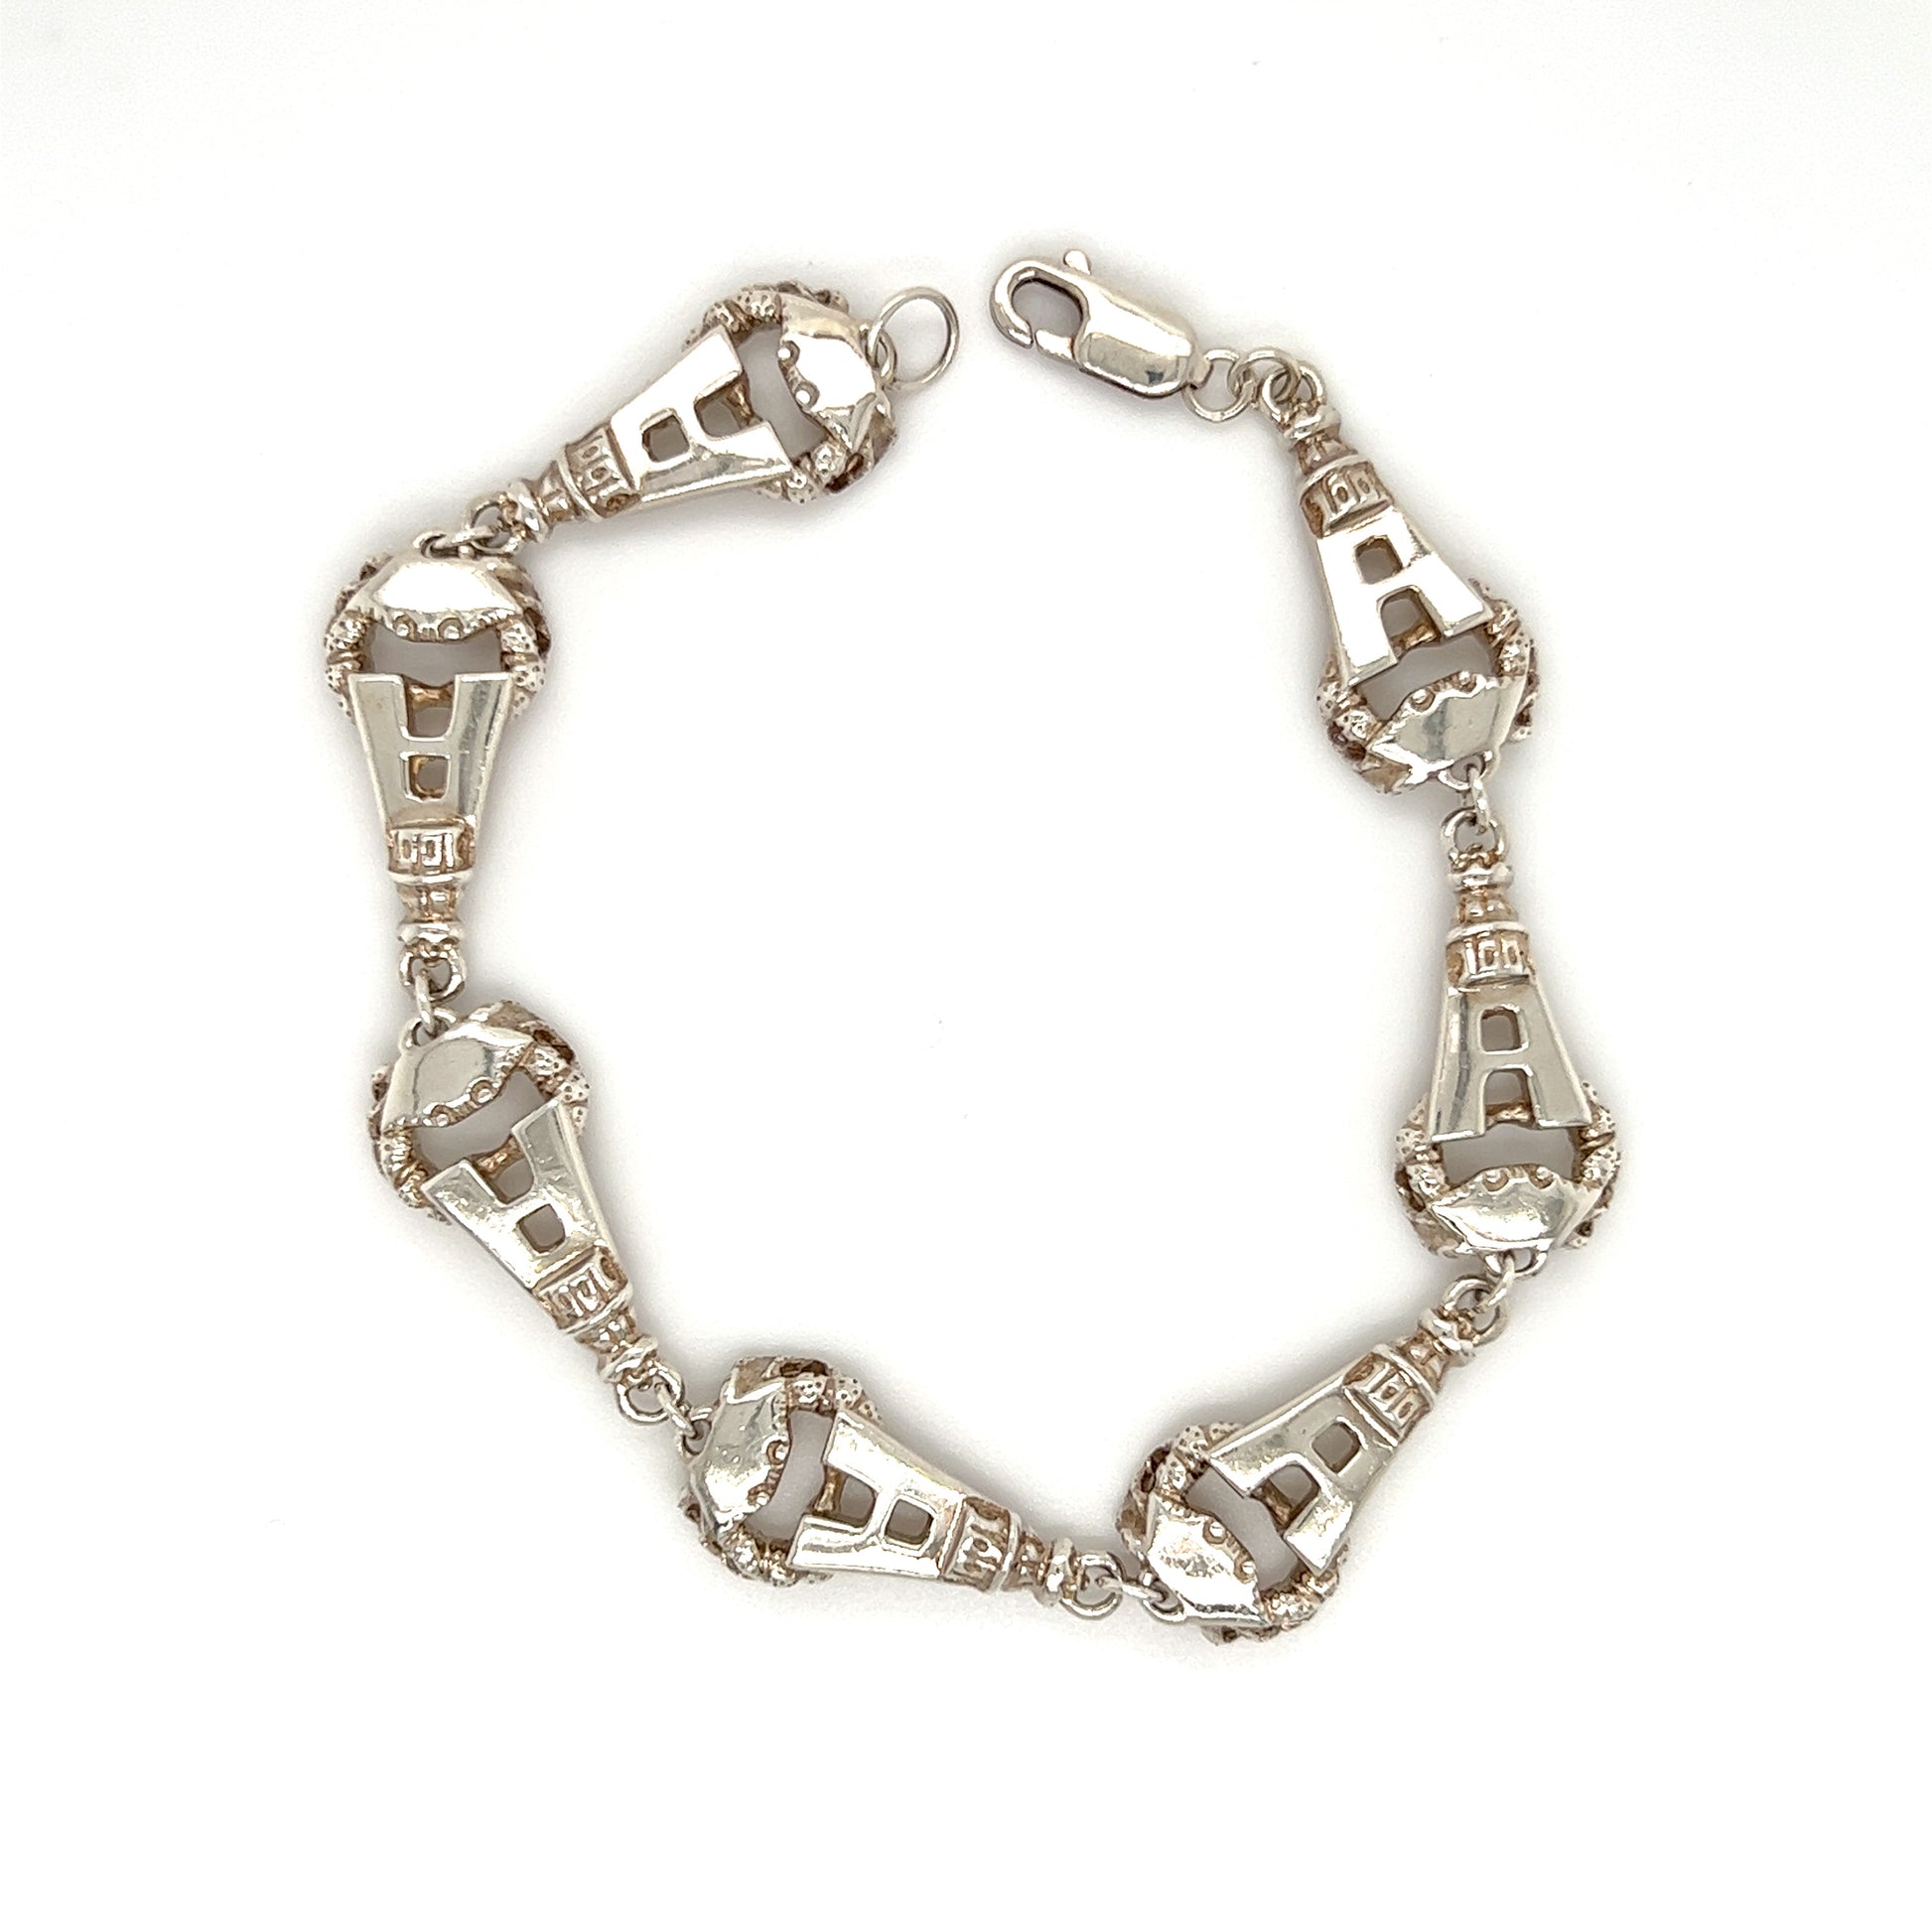 Annapolis Link Bracelet with Seven Crabs in Sterling Silver Full Bracelet Top View